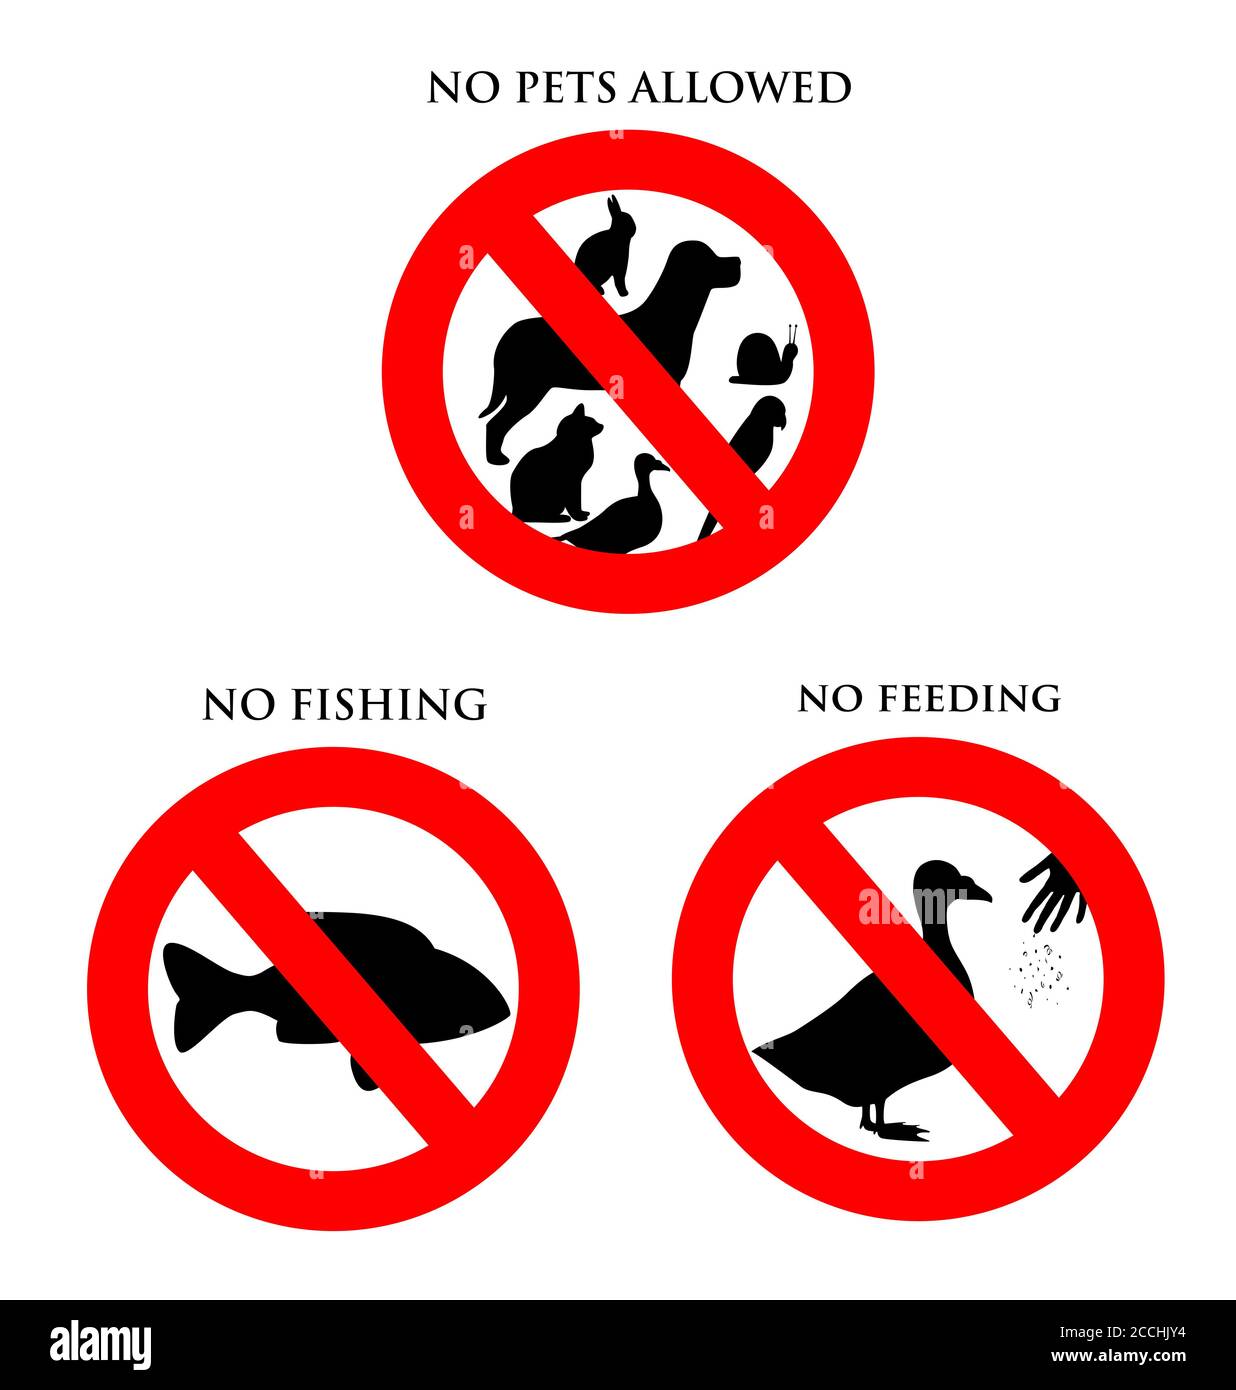 Animal Signs for No Pets Allowed, No Fishing, and No Feeding Stock Photo